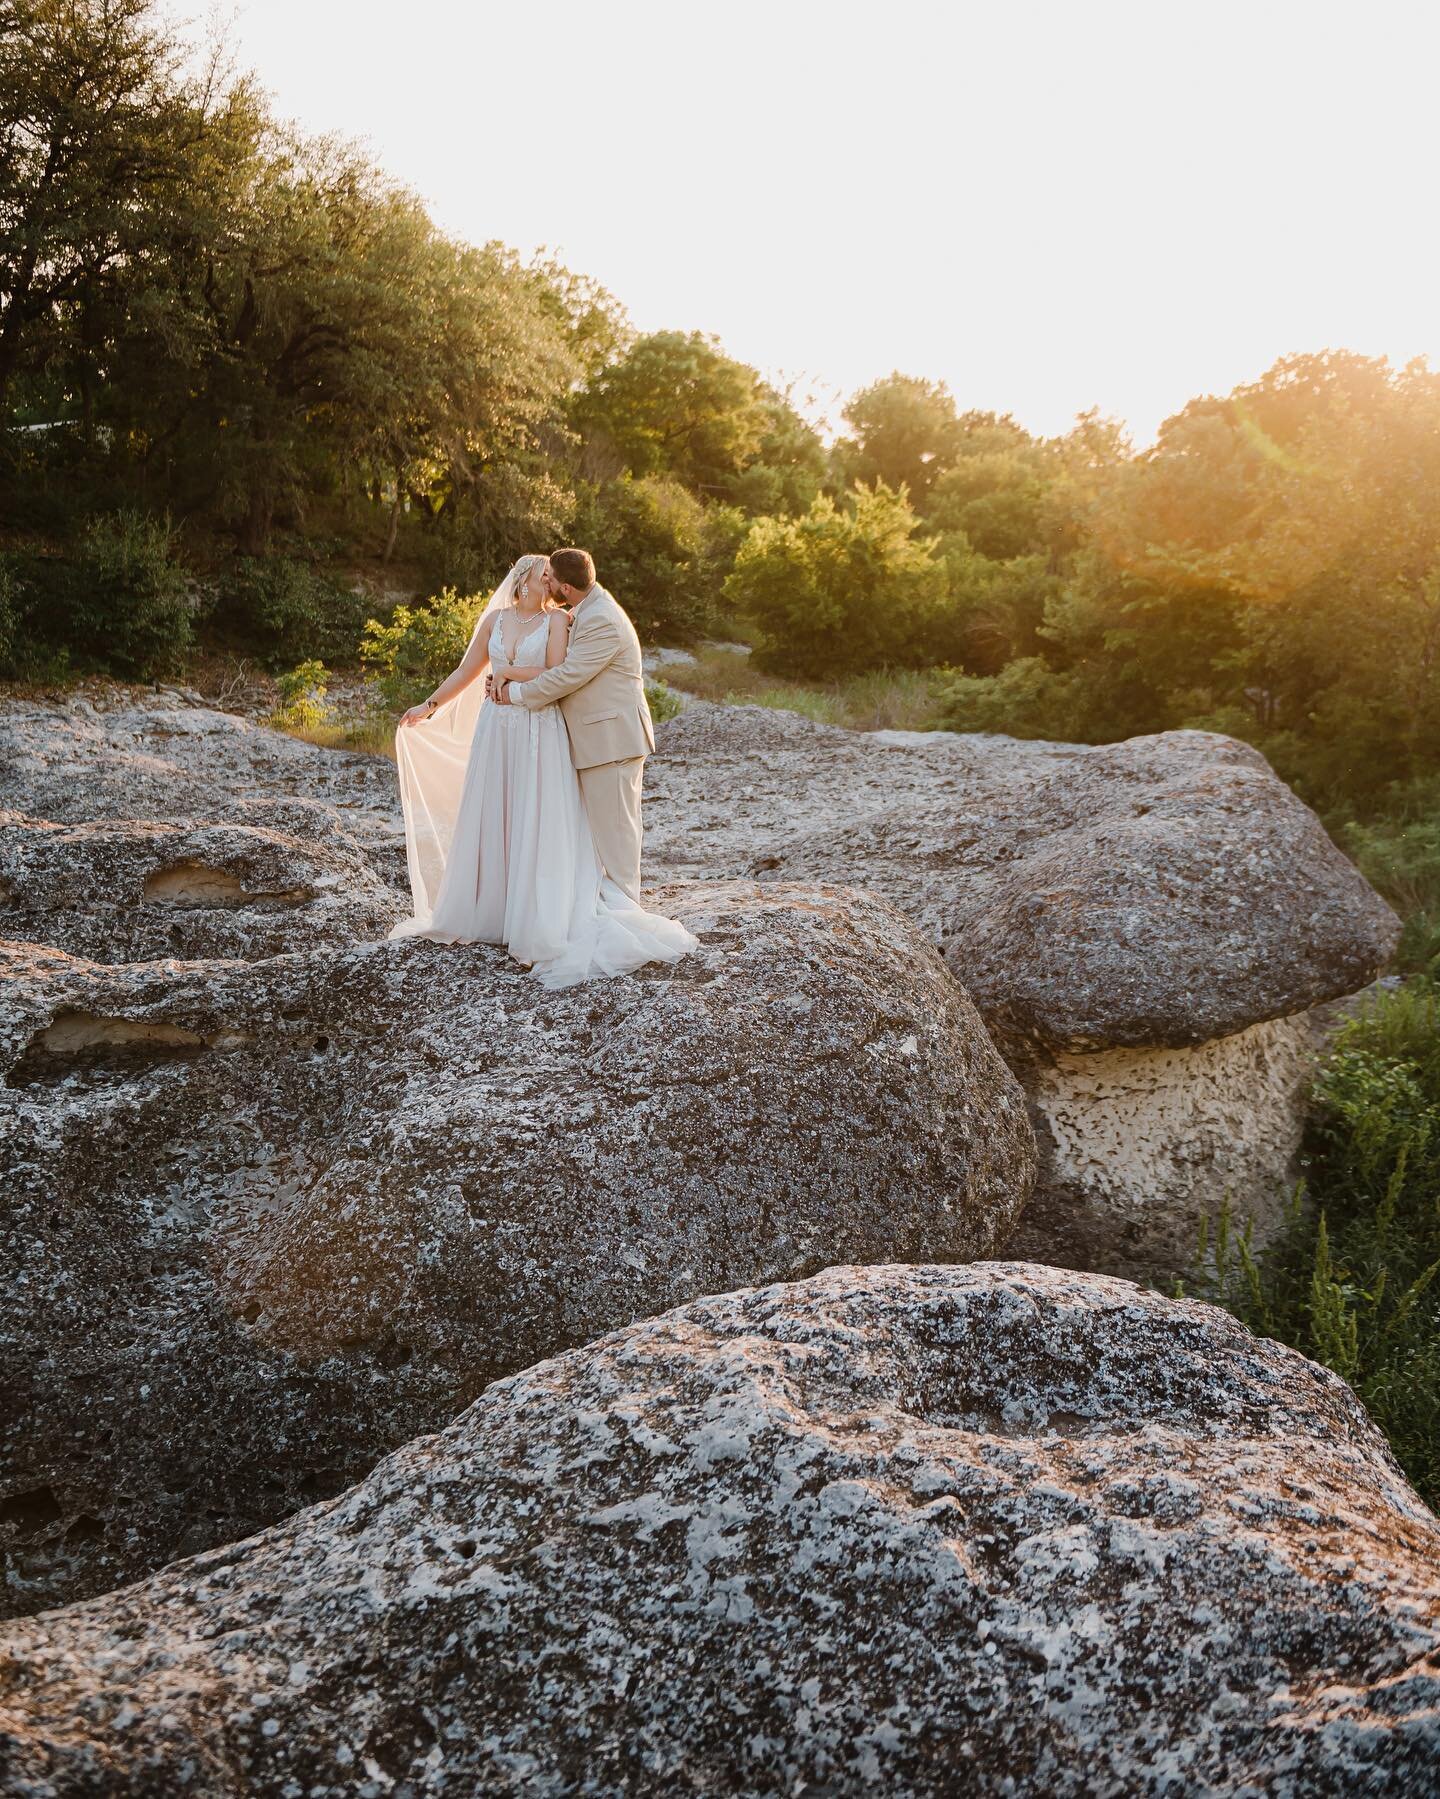 It&rsquo;s definitely wedding season! 😅Just sent off this sweet sneak peek. Now, to tackle editing the rest of the thousands of amazing images we captured on this lovely day.